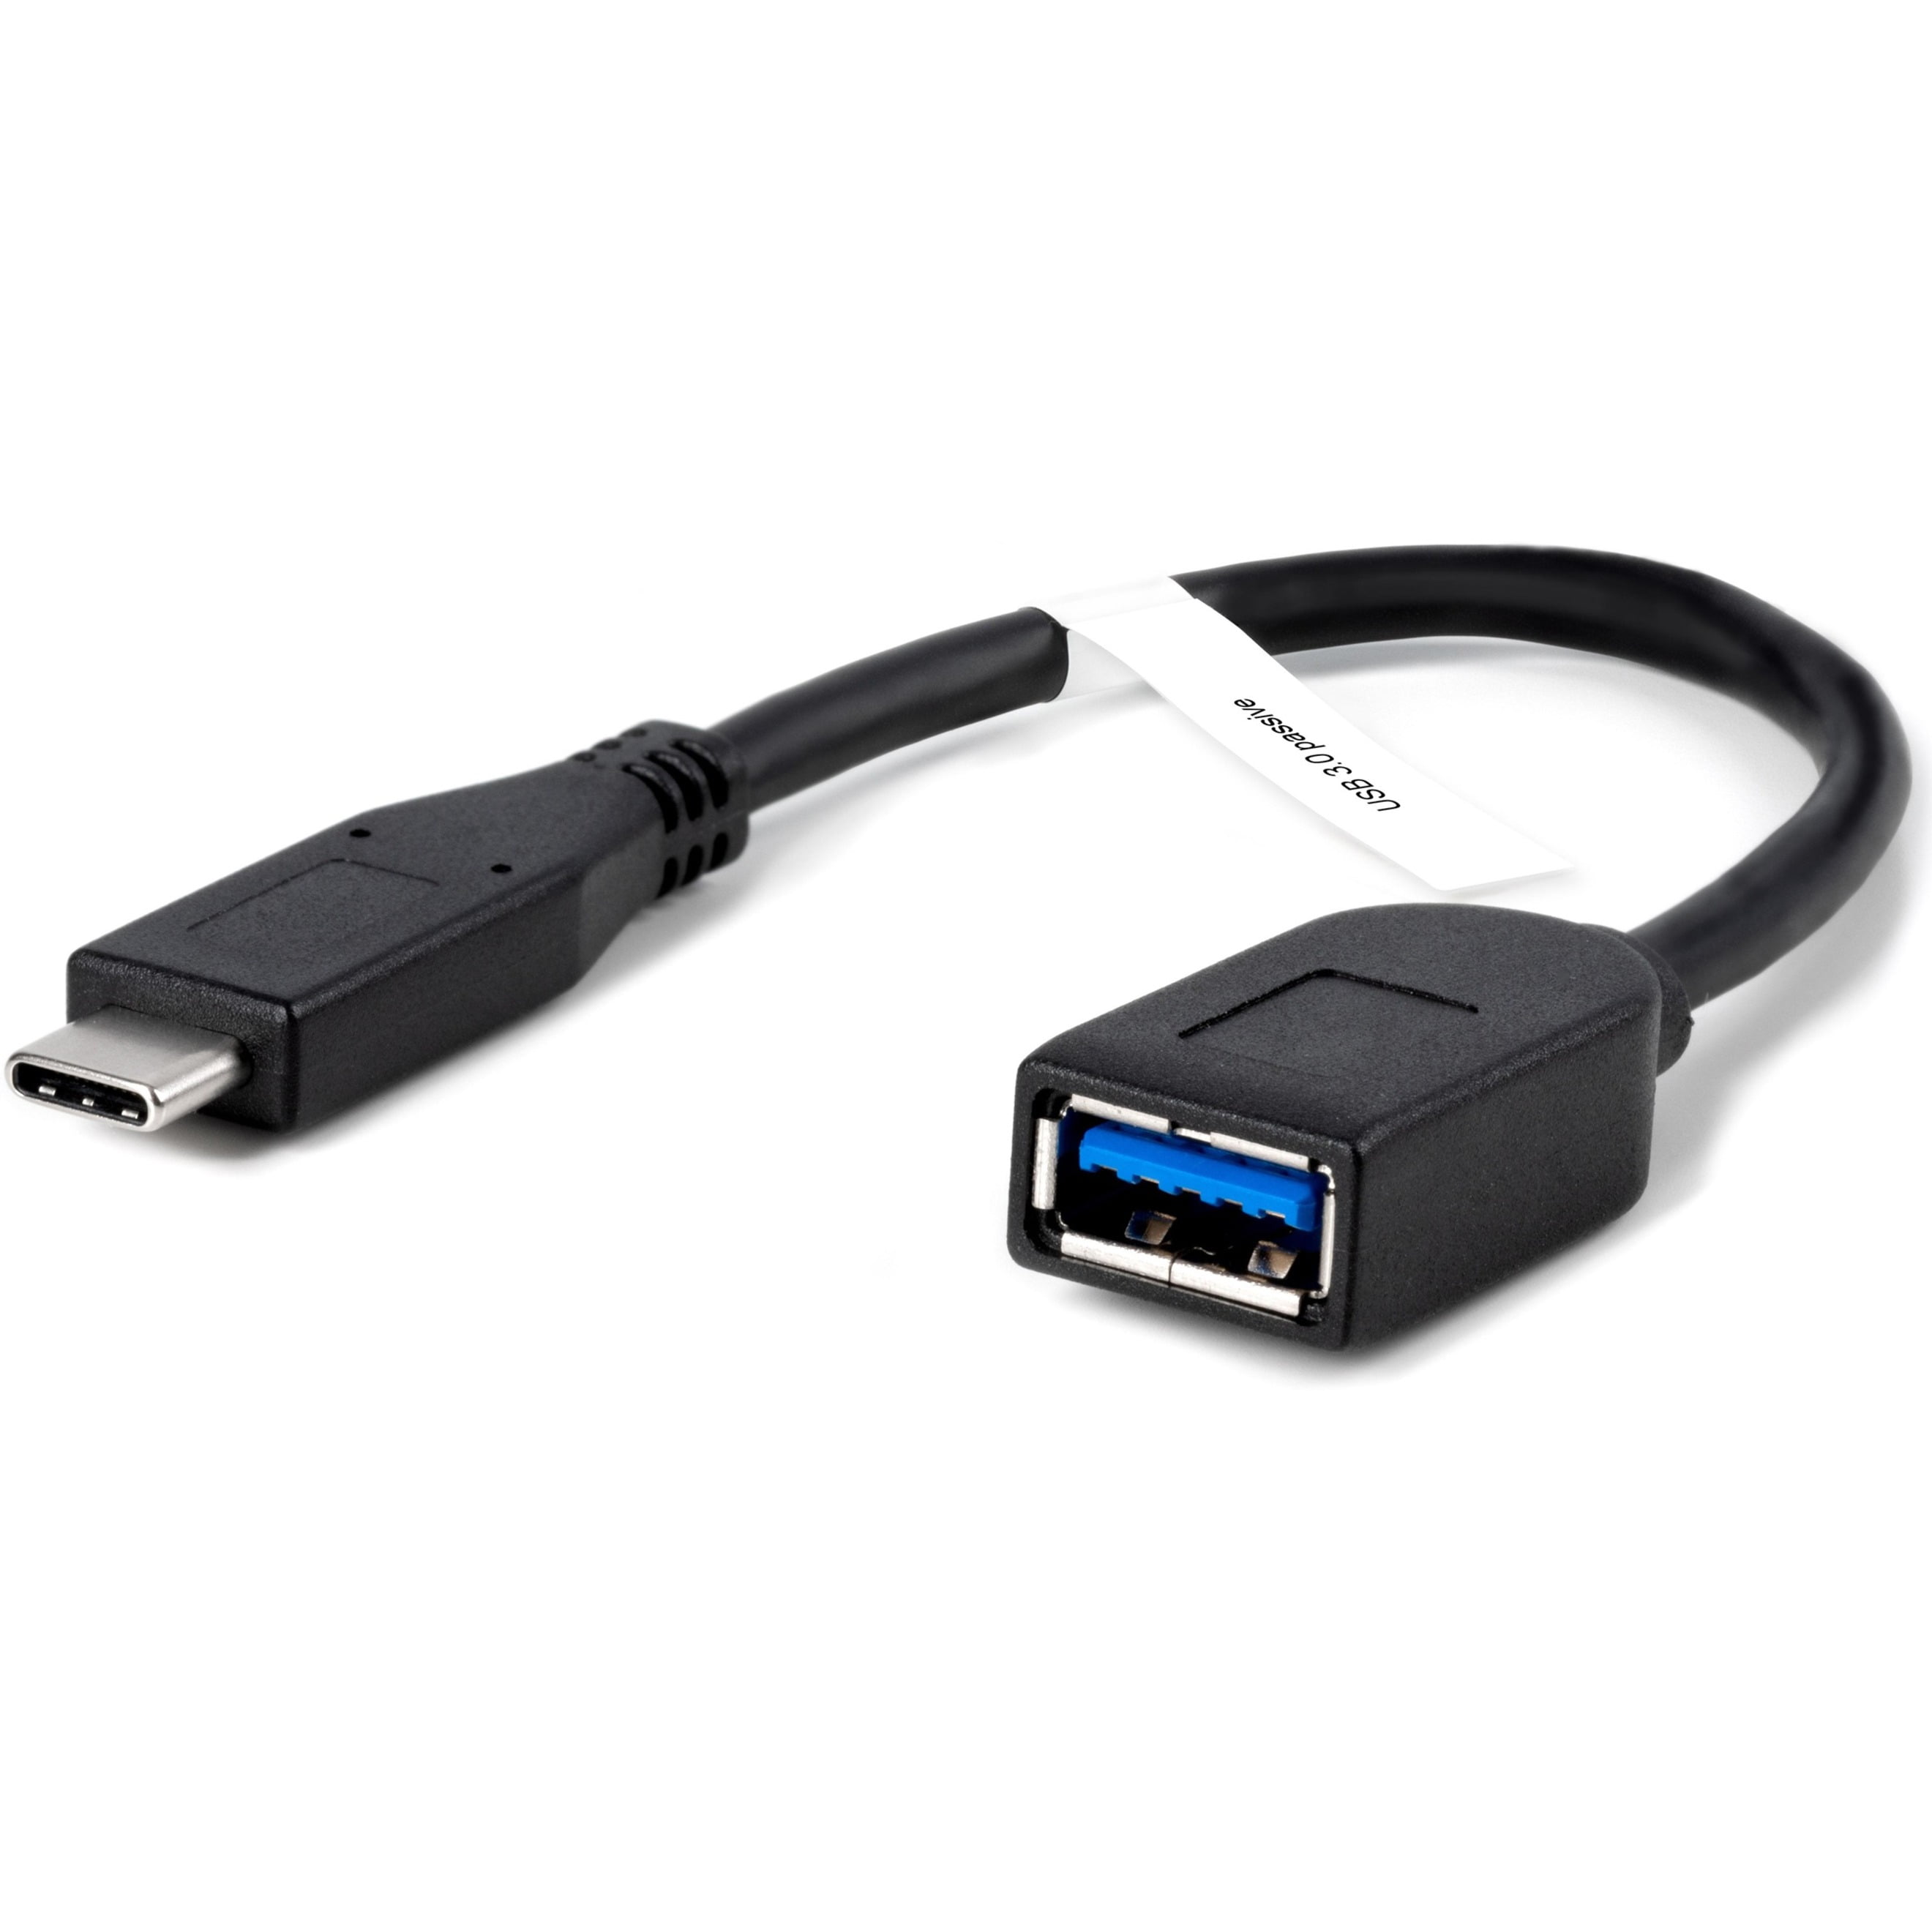 Destruktiv vakuum Erkende Plugable USB C to USB Adapter Cable, Enables Connection of USB Type C  Laptop, Tablet, or Phone to a USB 3.0 Device (20 cm) - Walmart.com